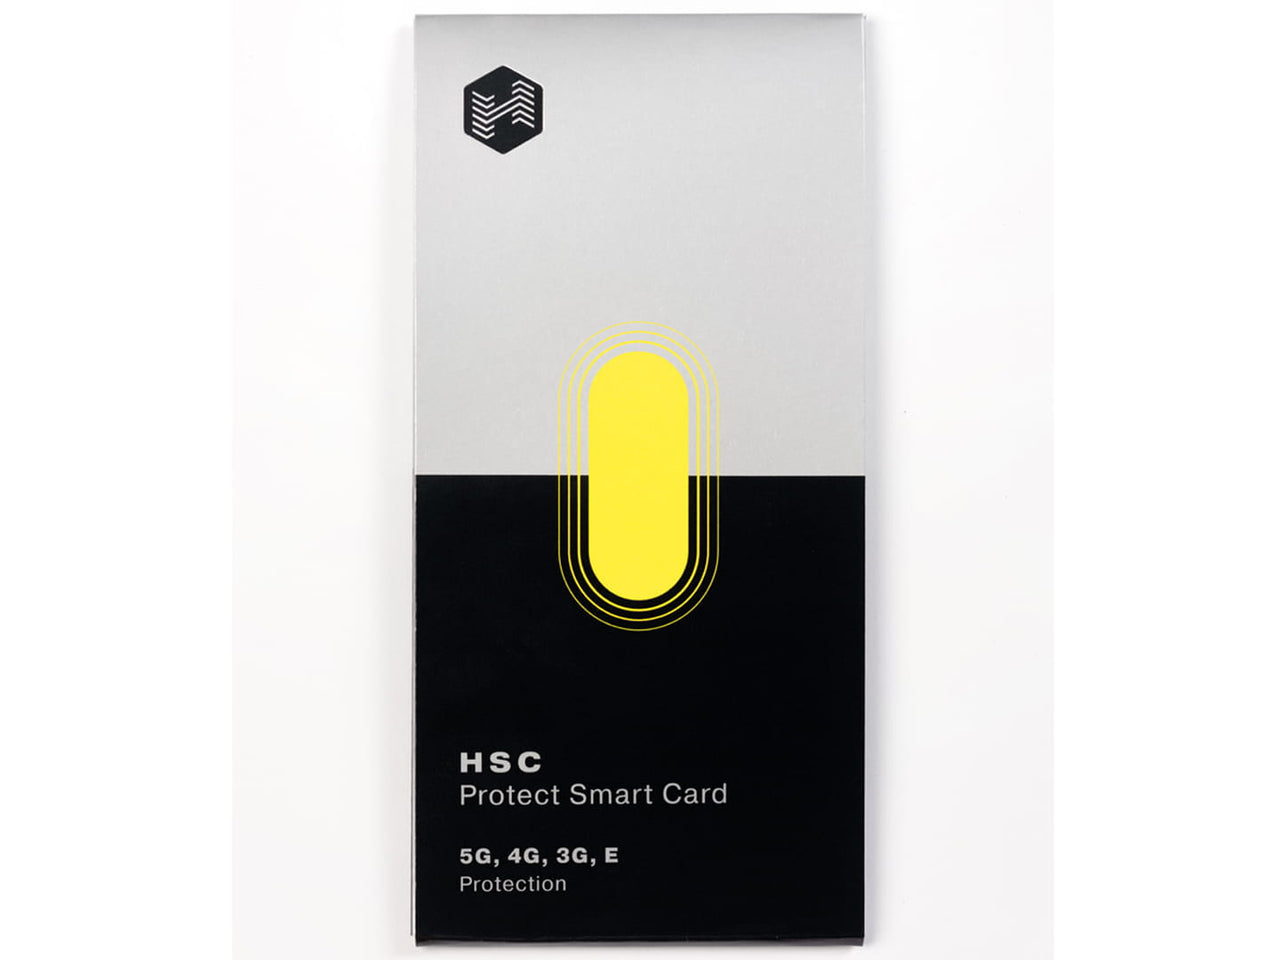 HSC Protect Smart Card | Get protected and live a healthier life